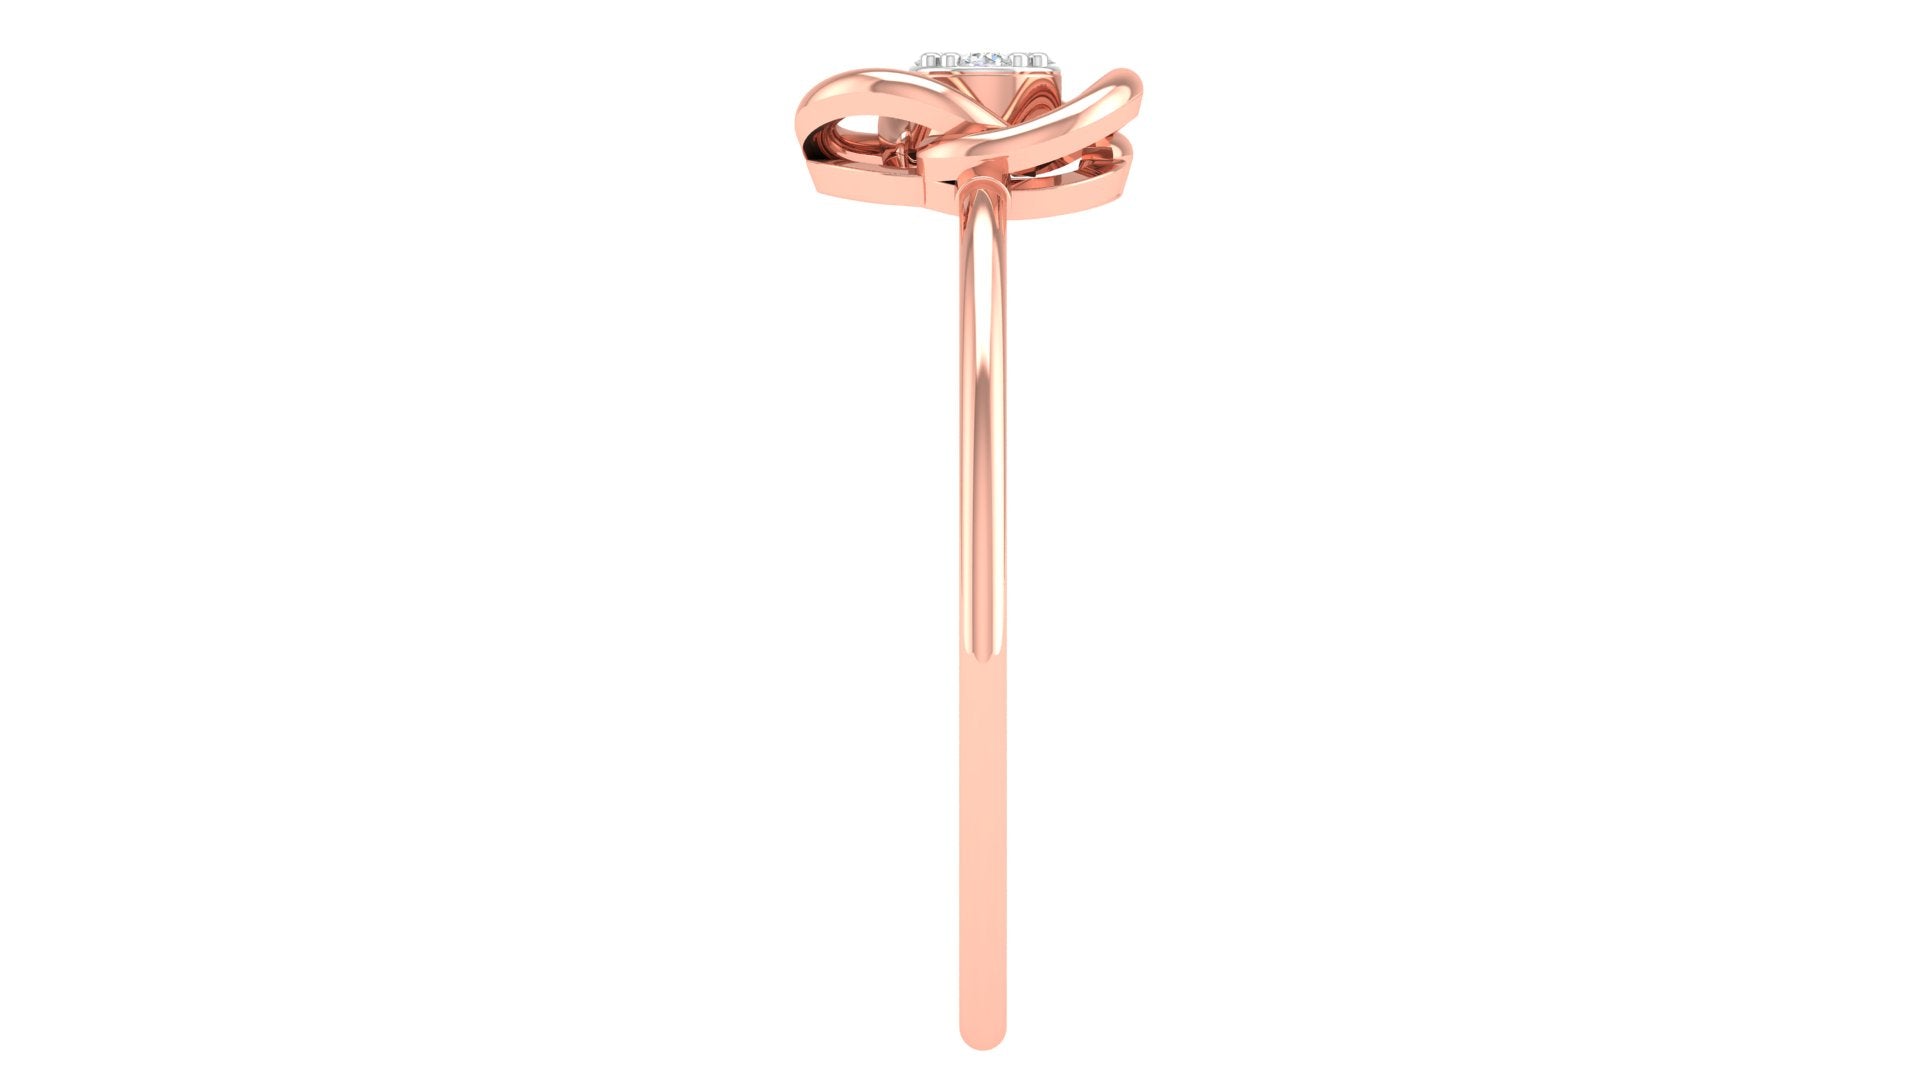 Roseate Bloom 18kt Gold Ring